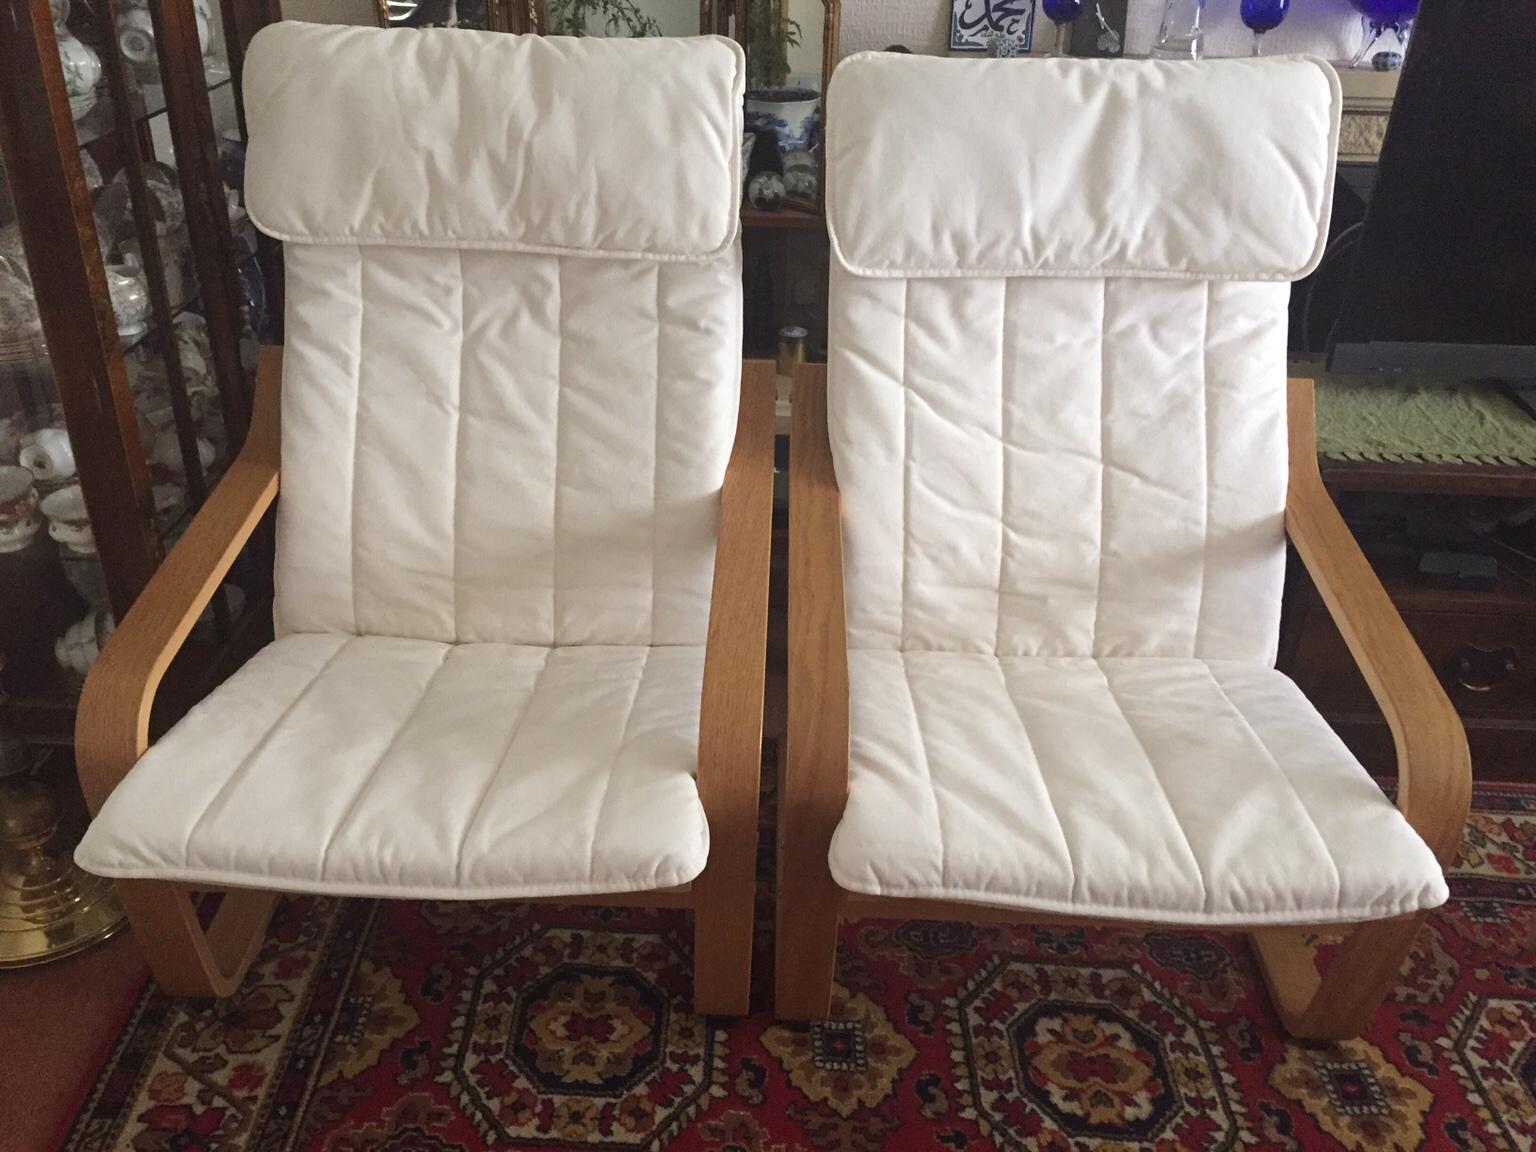 Ikea Poang Chairs In Gl51 Tewkesbury For 50 00 For Sale Shpock